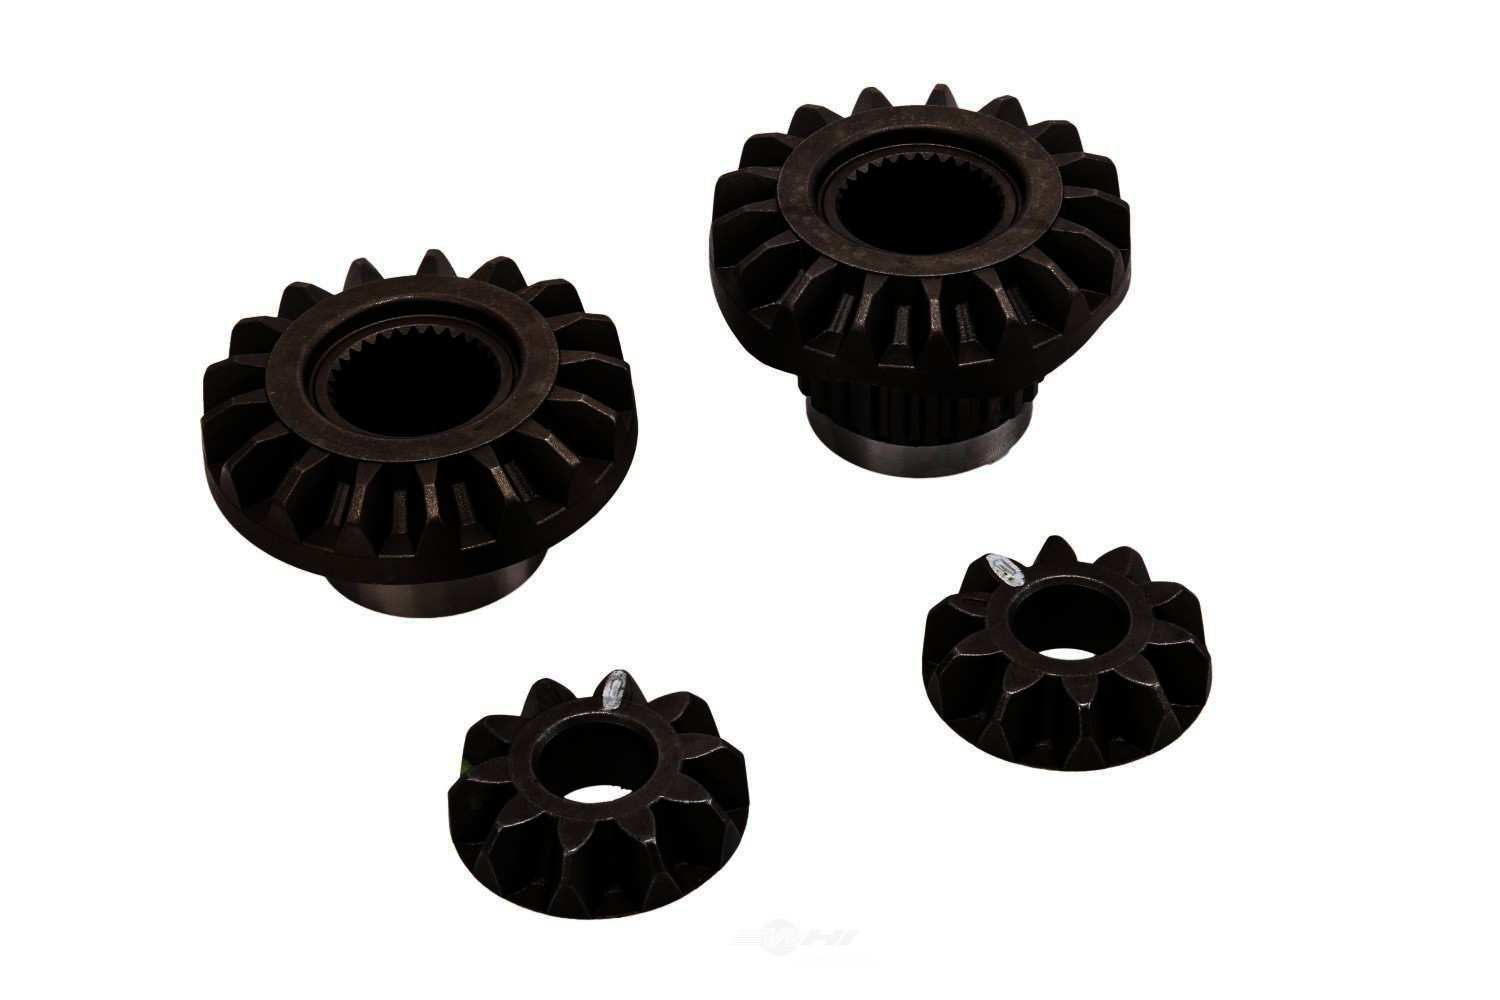 GM GENUINE PARTS - Differential Carrier Gear Kit - GMP 19180956